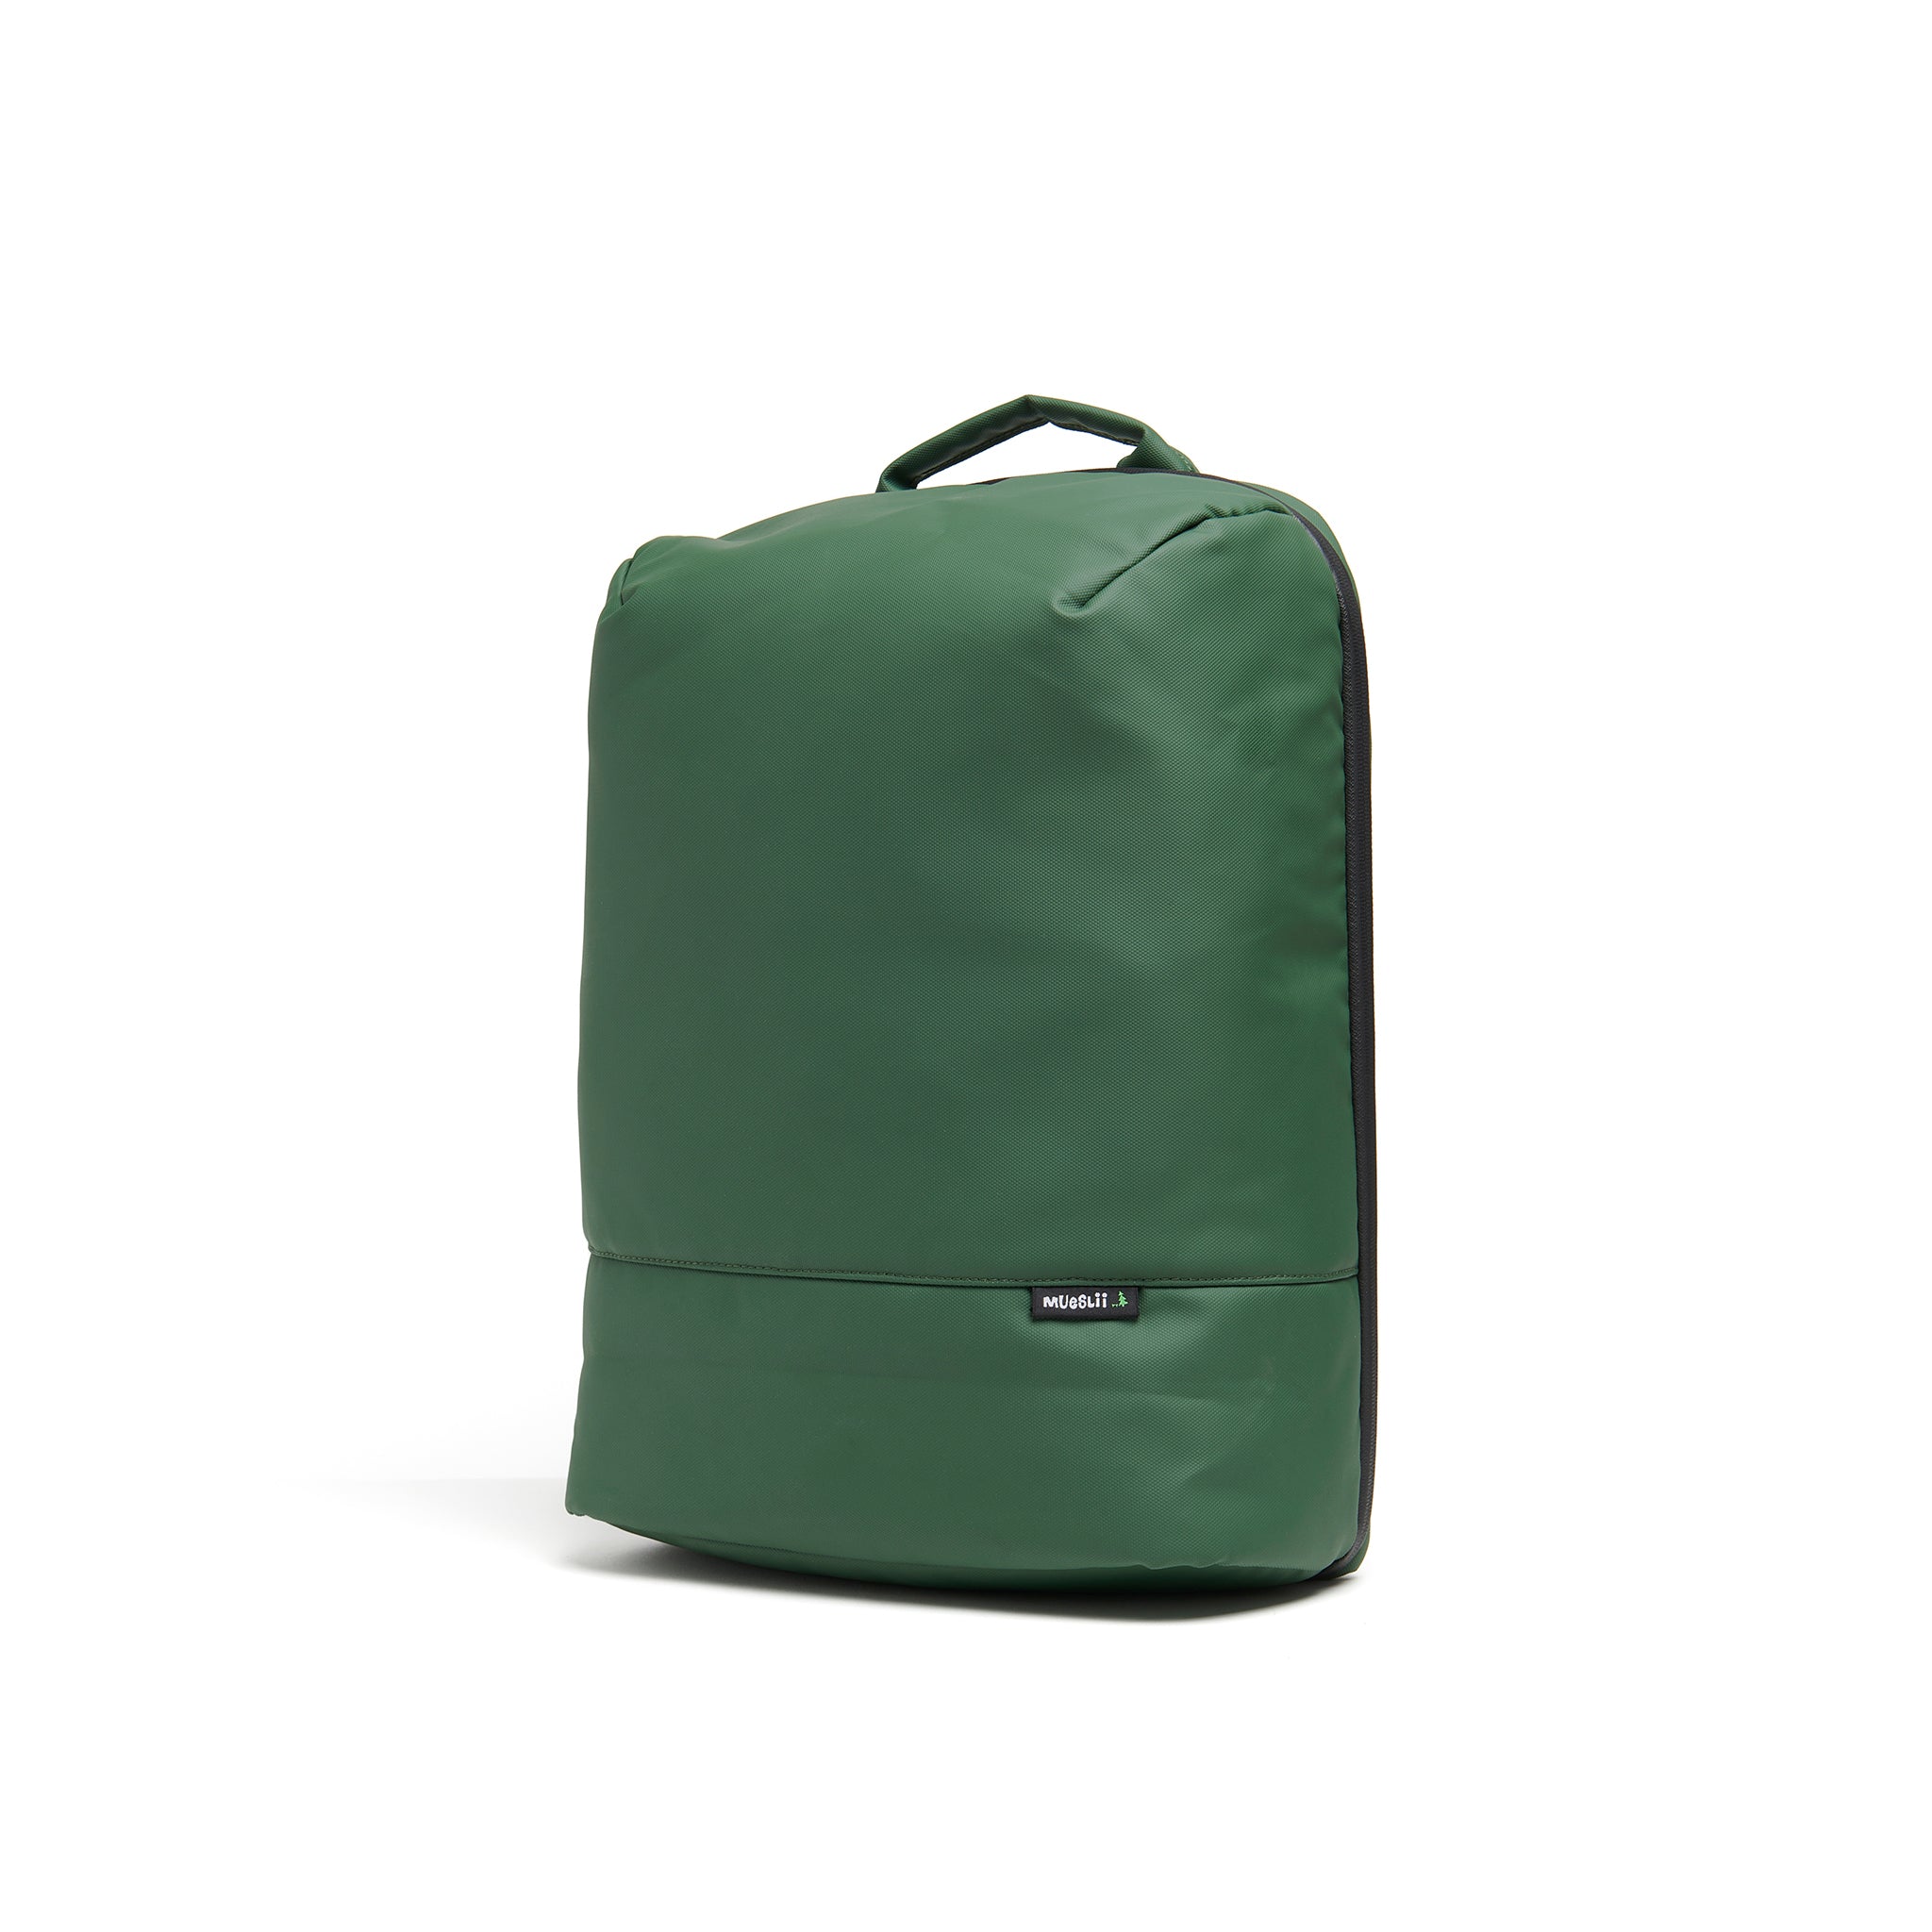 Mueslii travel backpack, made of PU coated waterproof nylon, with a laptop compartment, color green, side view.